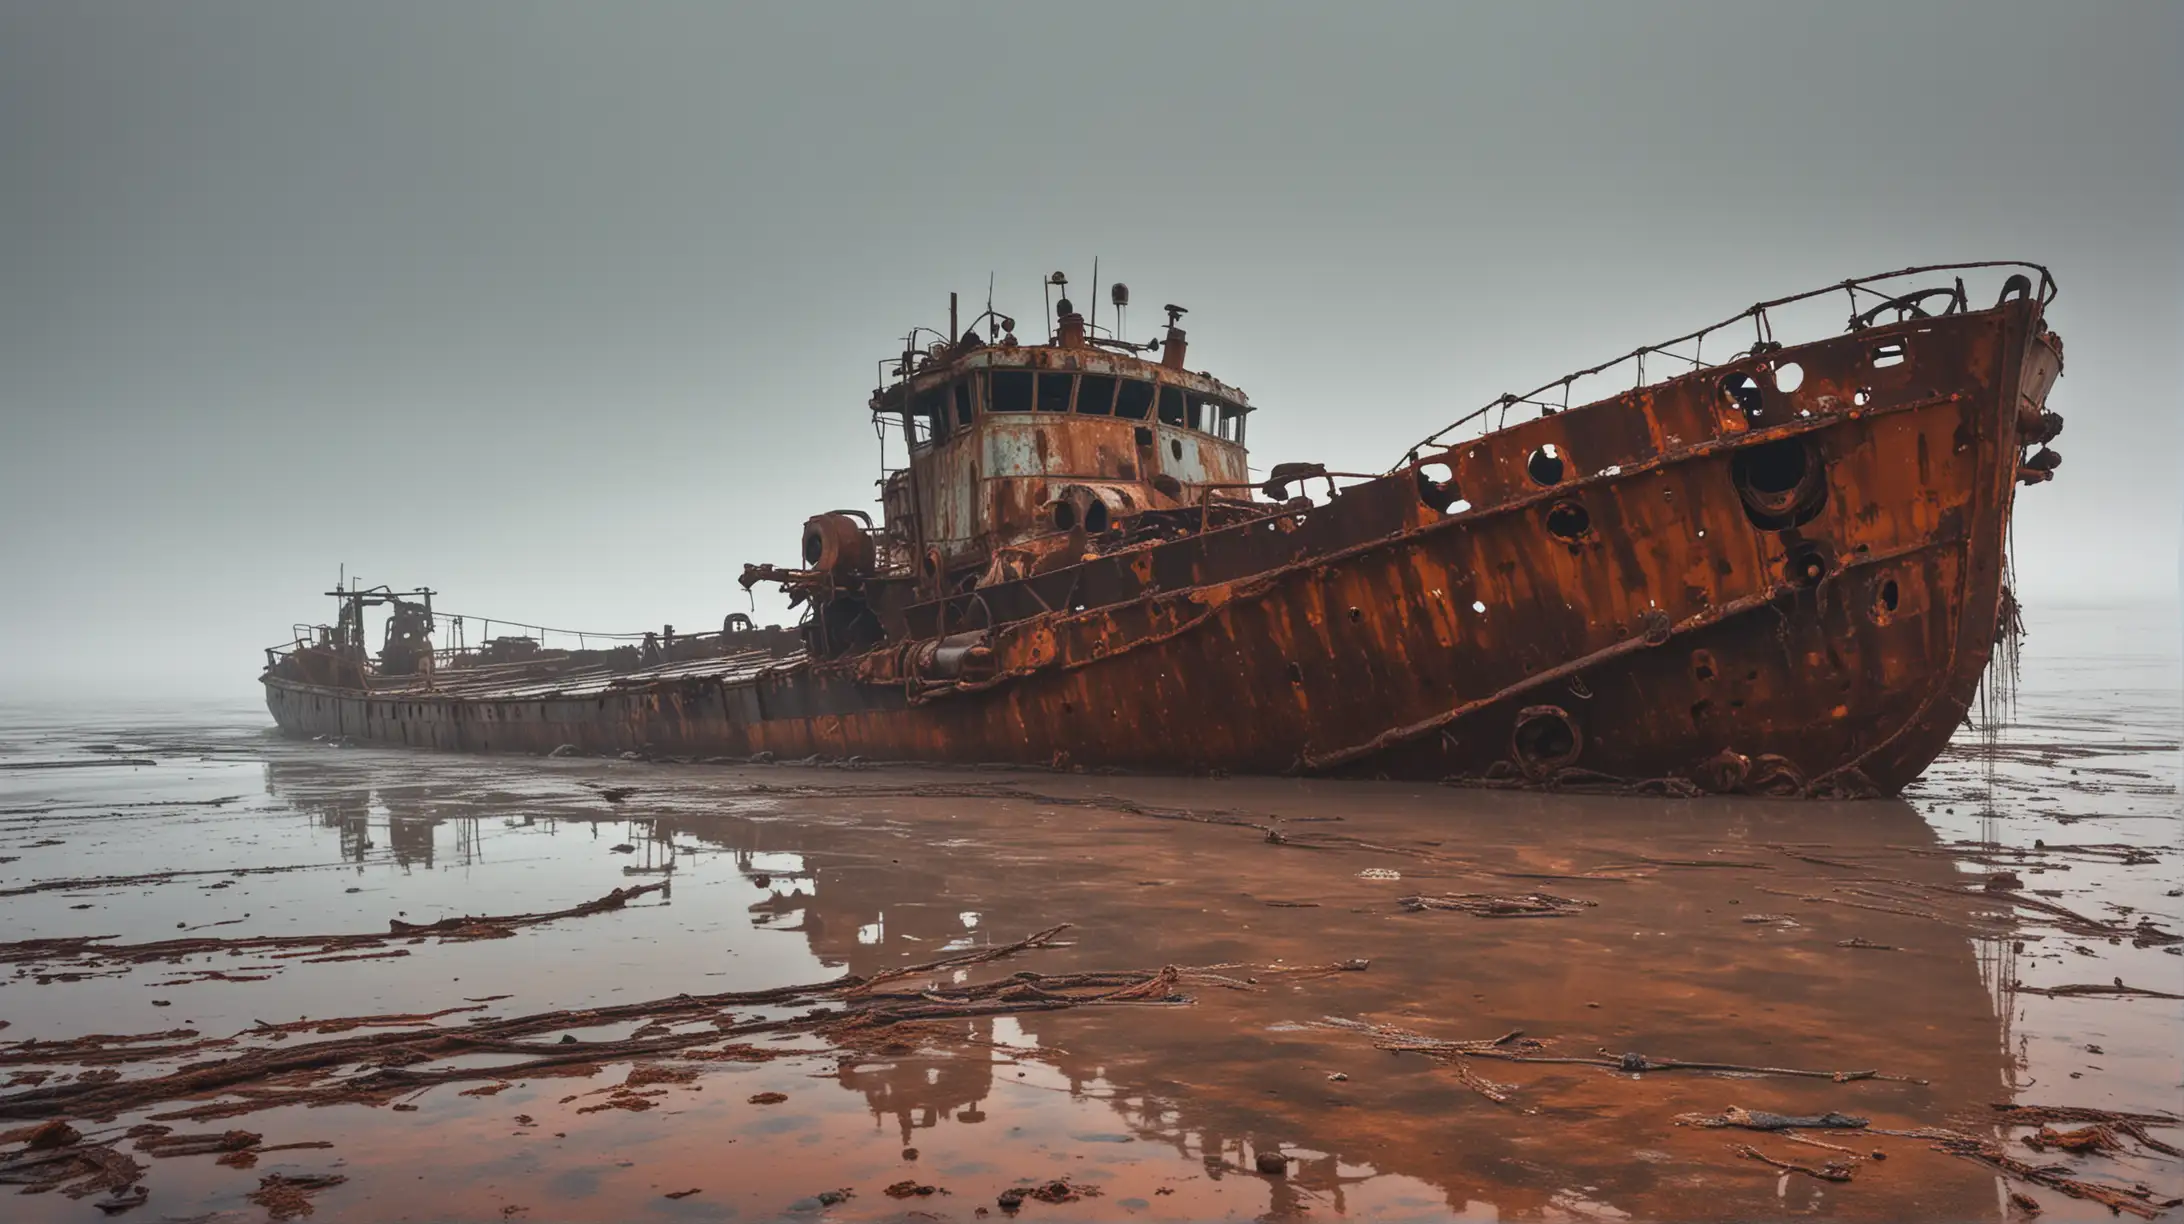 RustEaten Old Tanker Wreckage in Shallow Gulf Psychedelic Rain and Fog